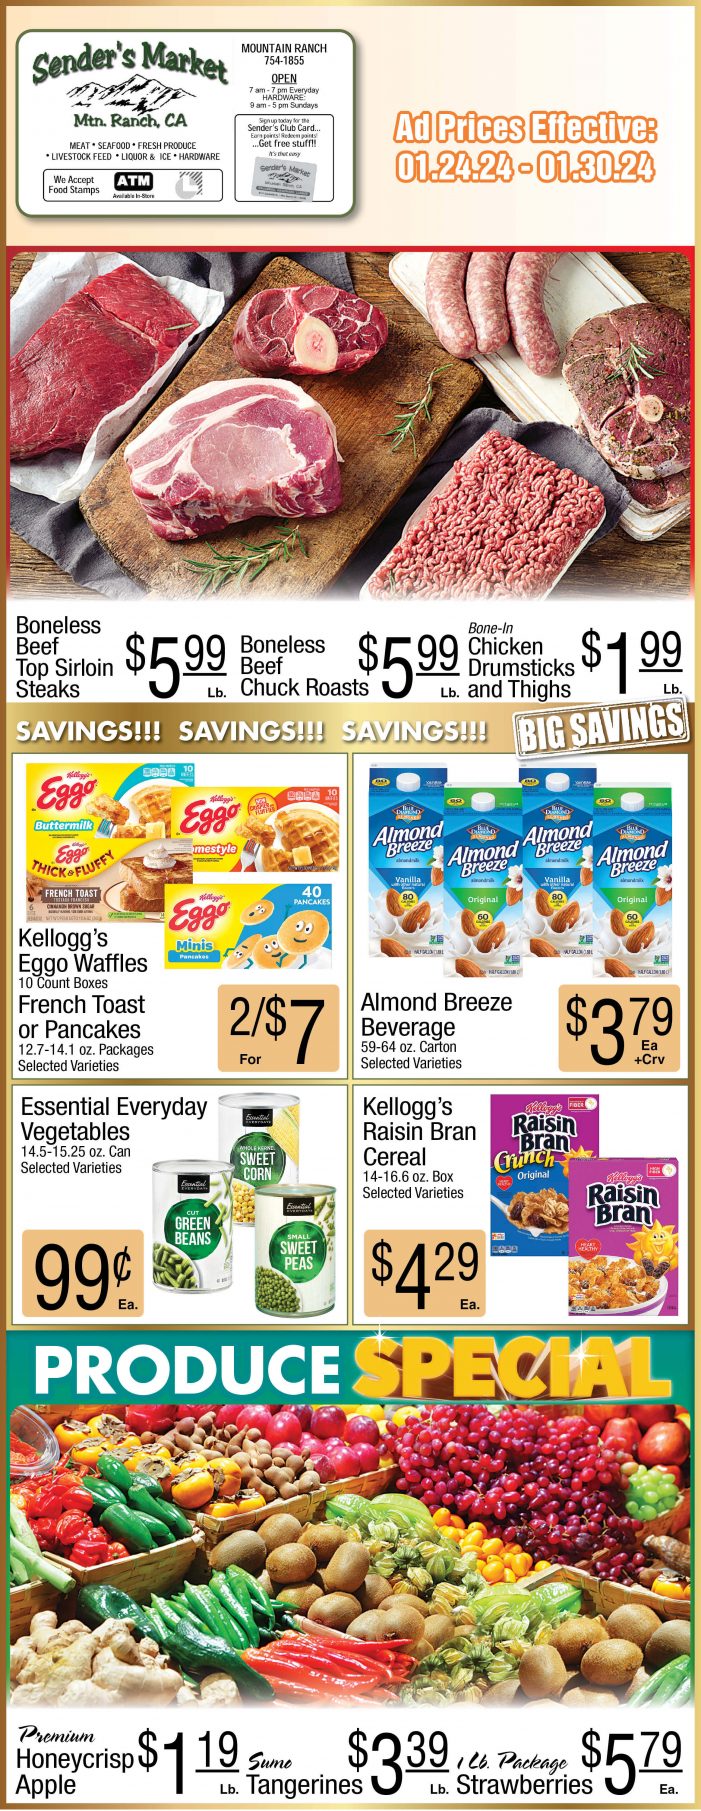 Sender’s Market Weekly Ad & Grocery Specials Through January 30! Shop Local & Save!!